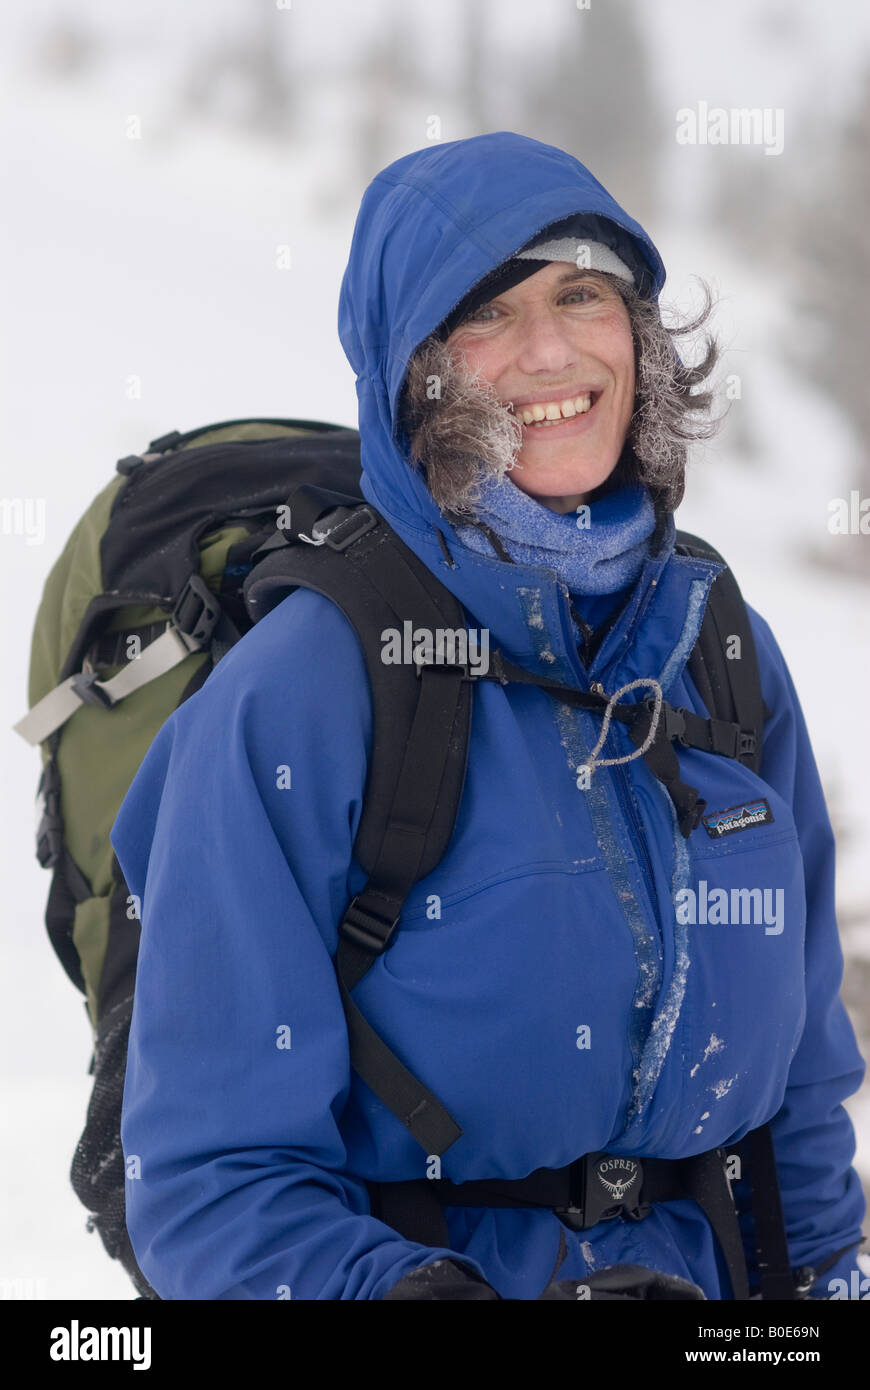 Wimter portrait of a woman skier with frosty in her hair Stock Photo